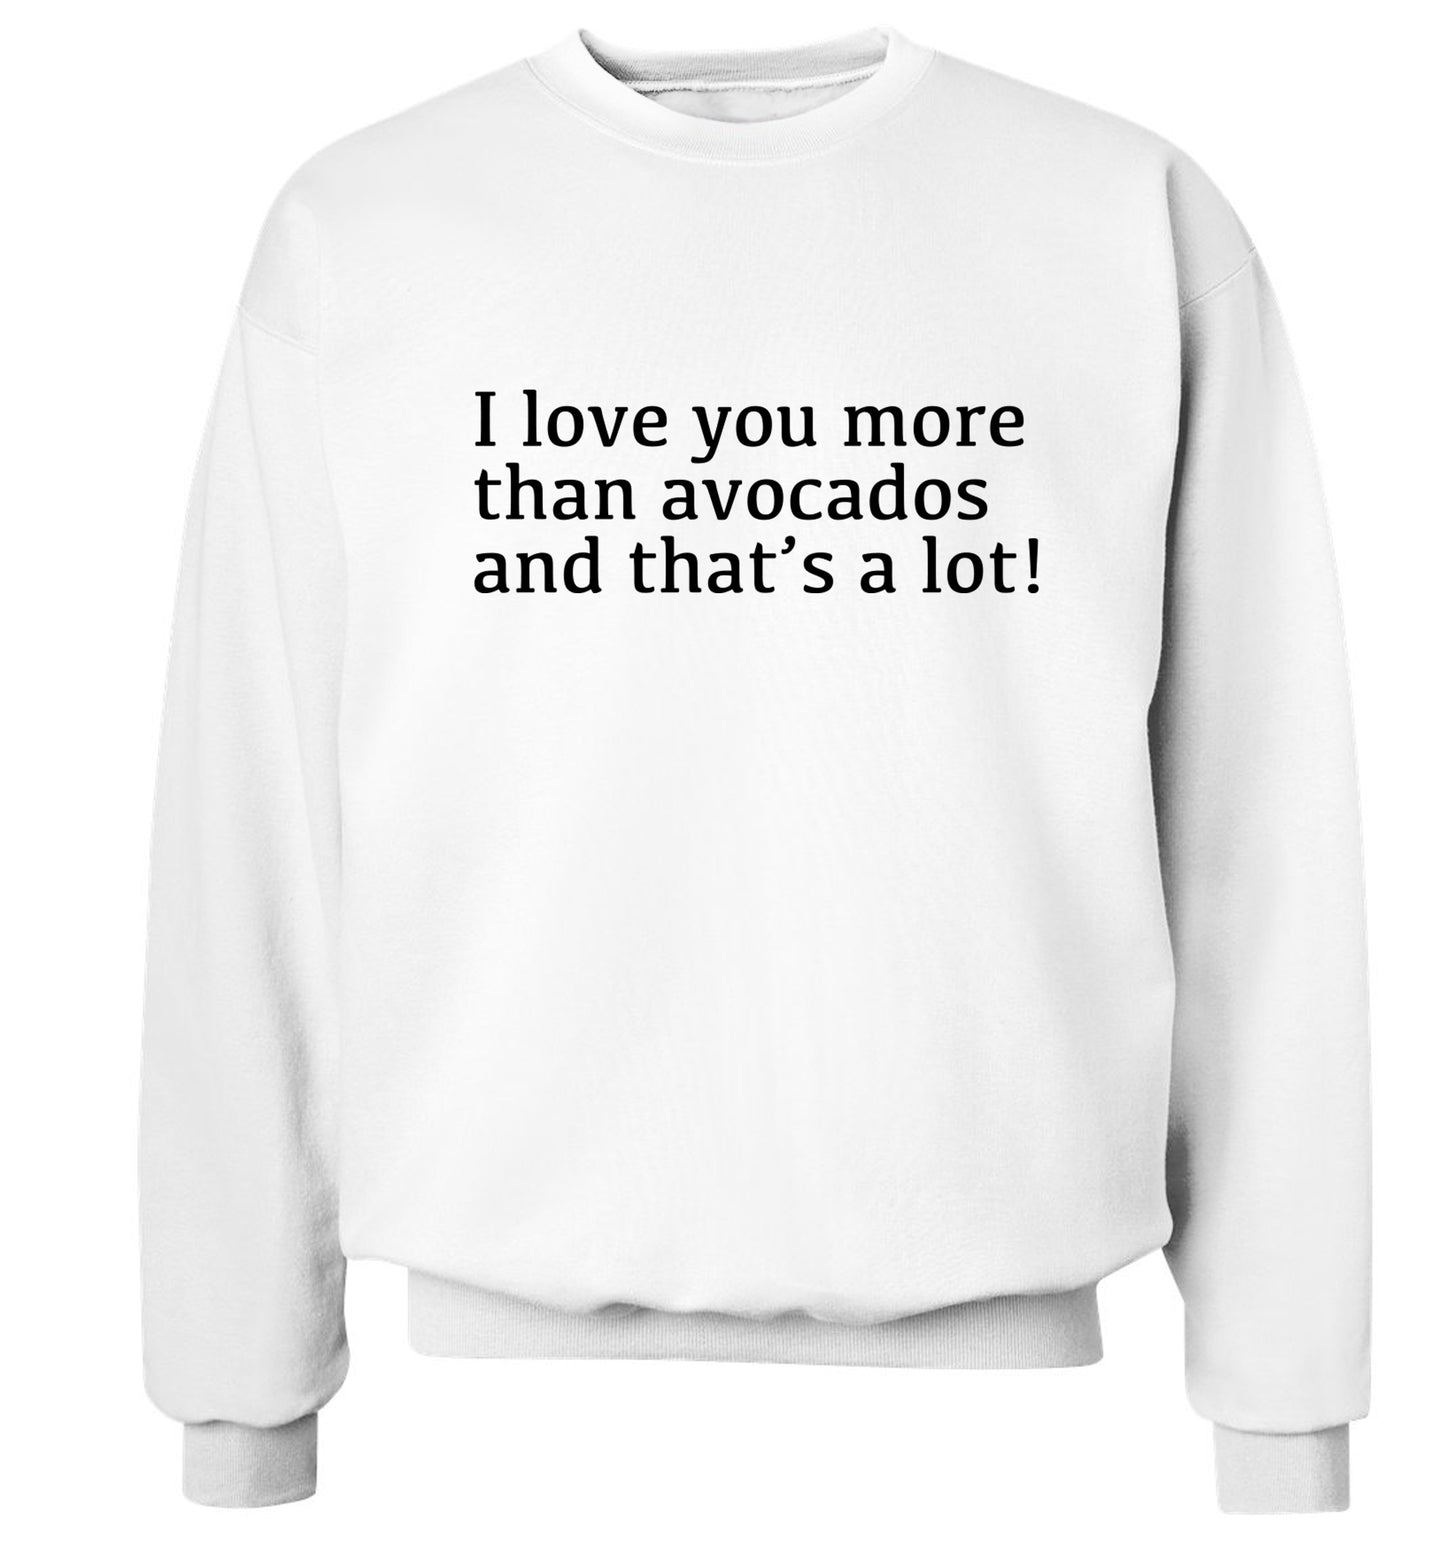 I love you more than avocados and that's a lot Adult's unisex white Sweater 2XL